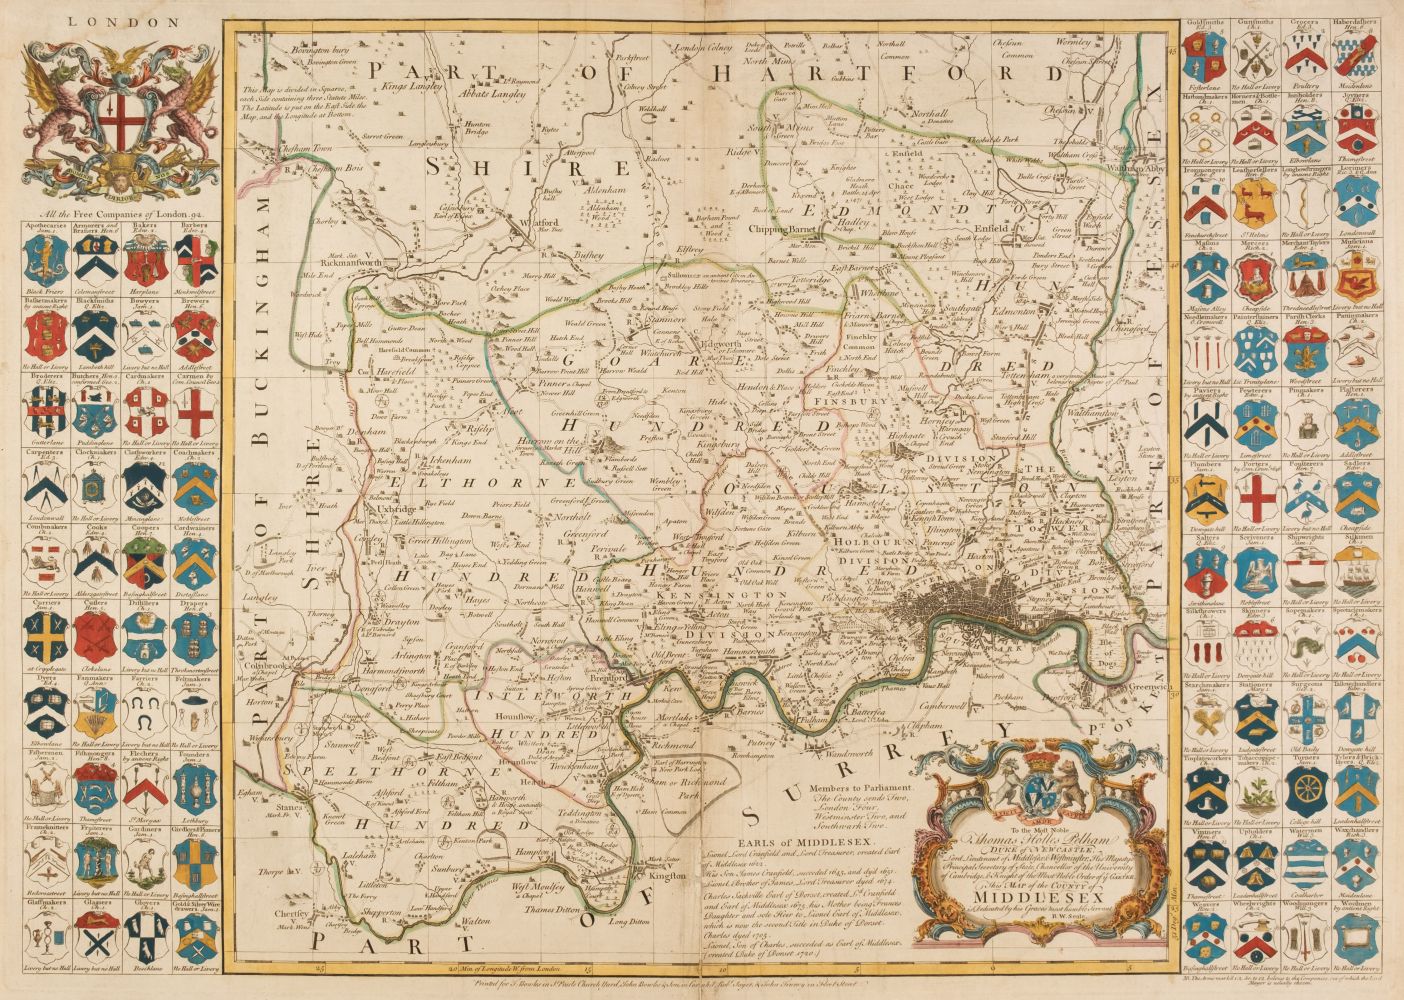 Middlesex. Seale (Richard), ..., Map of the County of Middlesex..., 1765